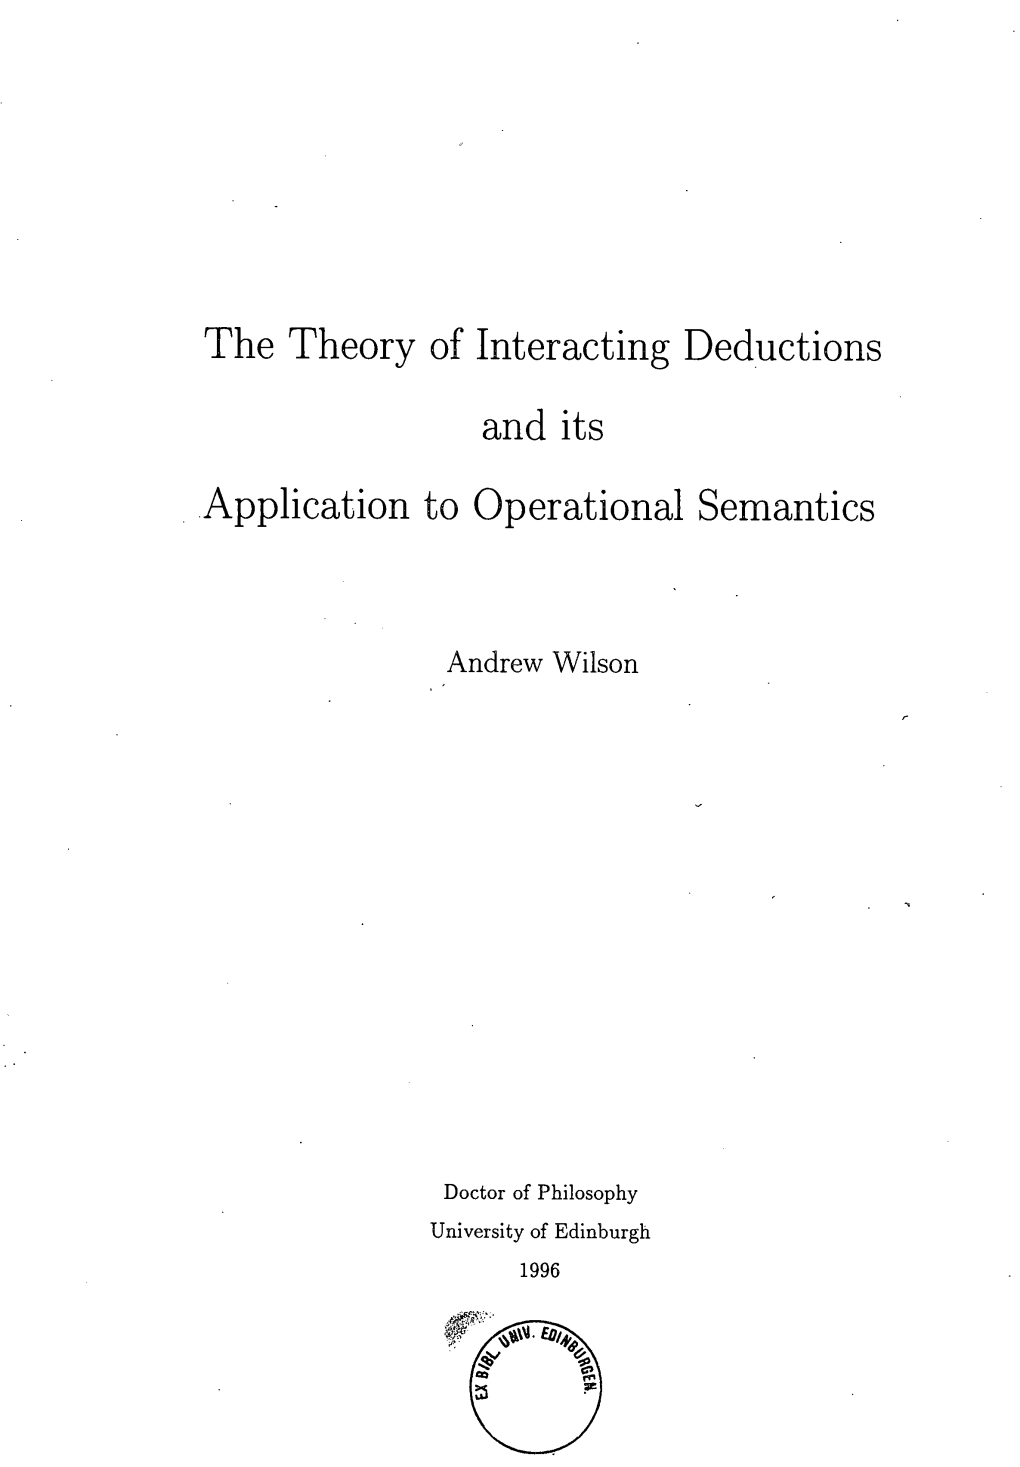 The Theory of Interacting Deductions and Its Application to Operational Semantics